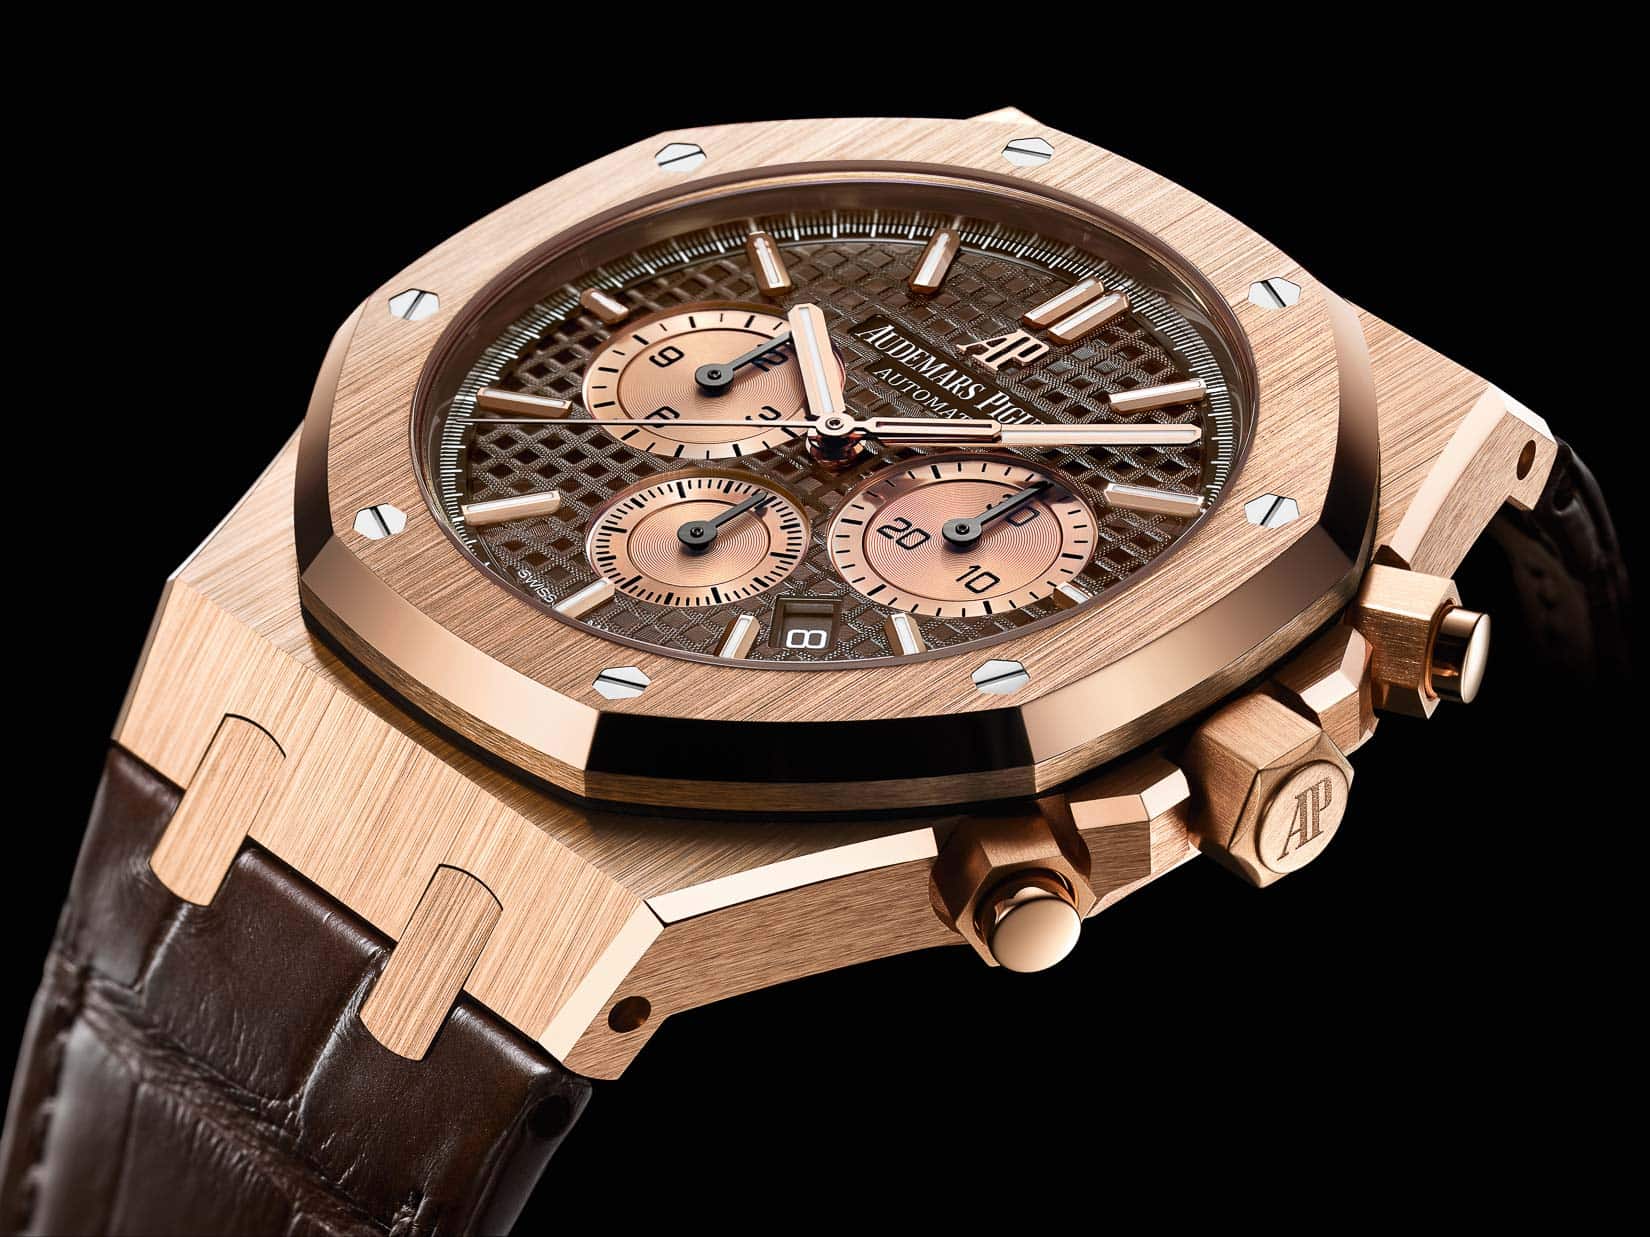 20 Years of Audemars Piguet Royal Oak Chronograph Watches - The 2017 ...